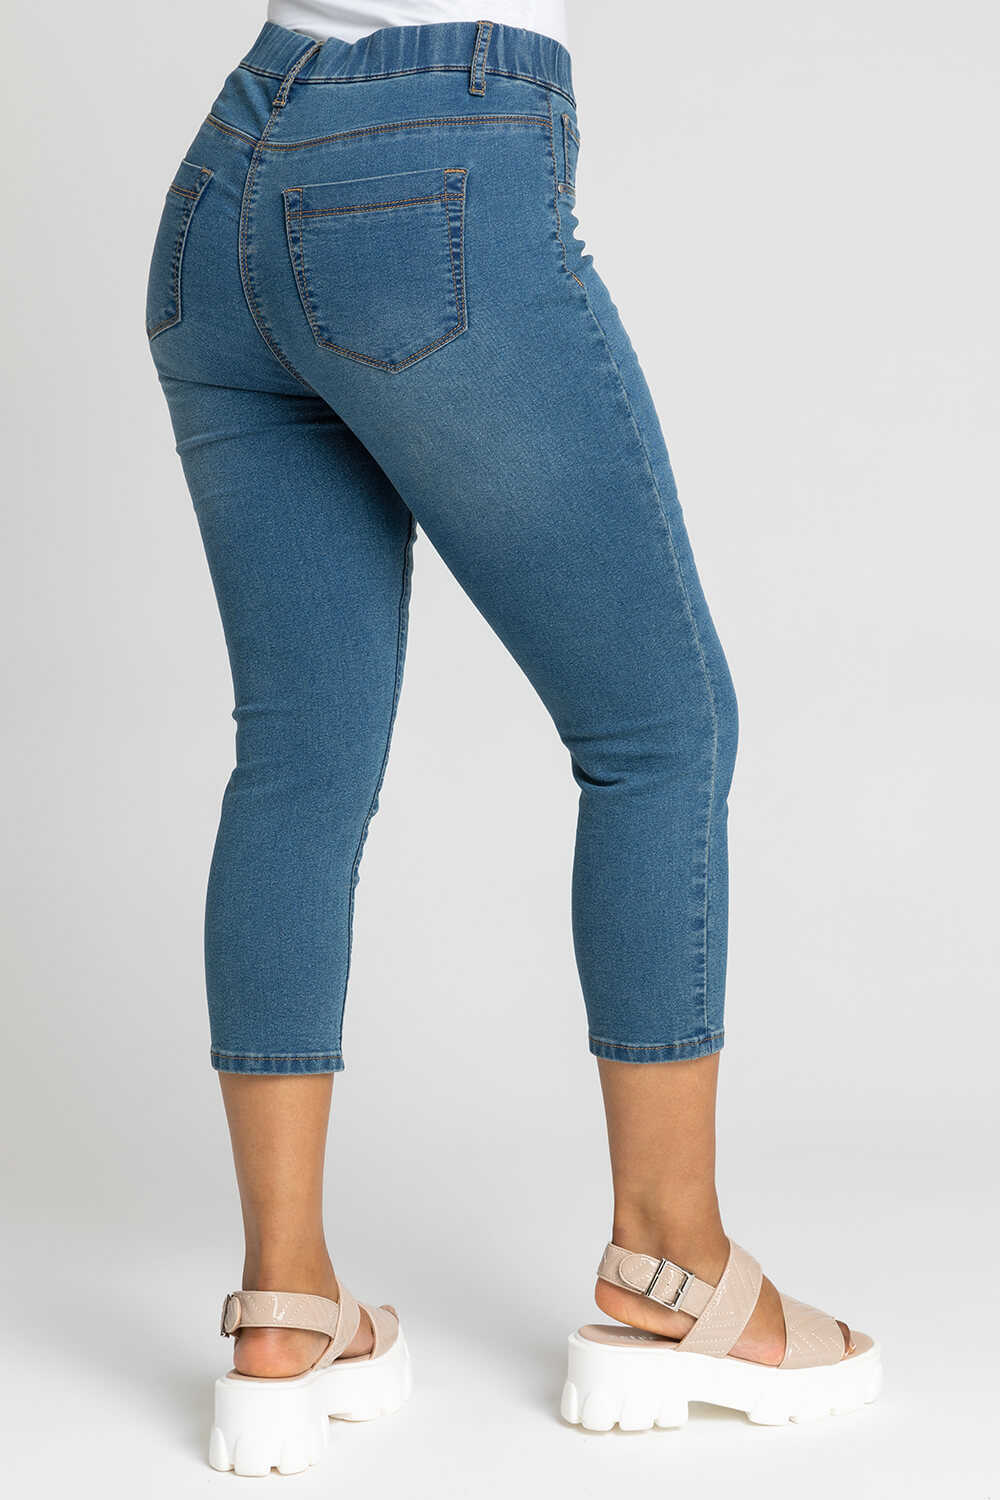 Aldi cropped jeggings - $8.99. Not too long even for petites! I'm